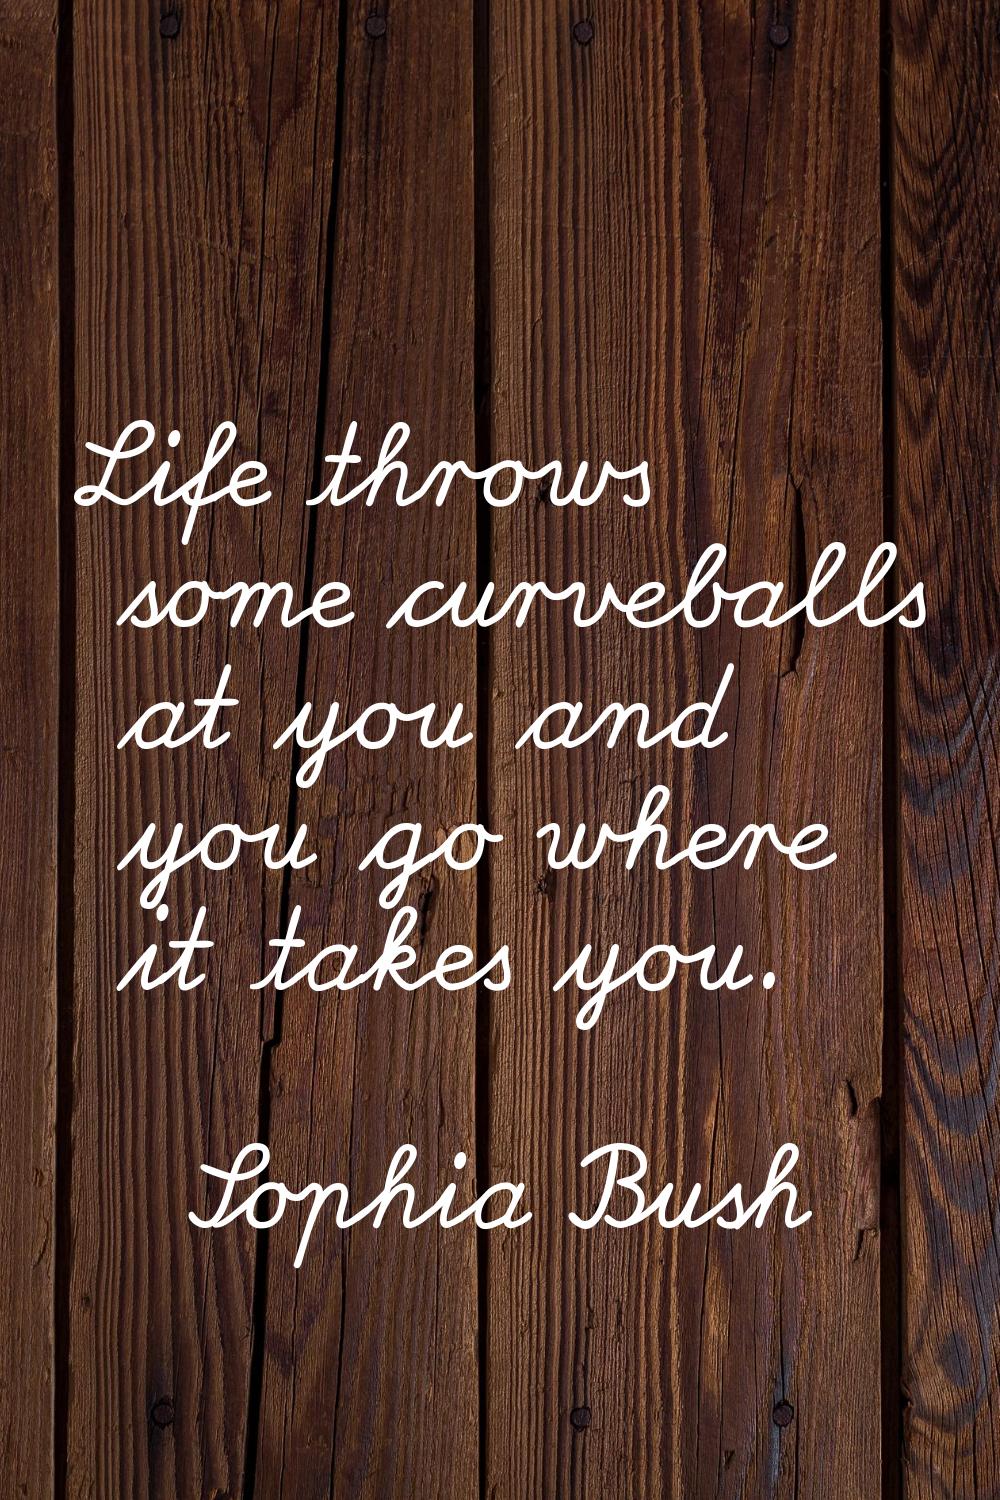 Life throws some curveballs at you and you go where it takes you.